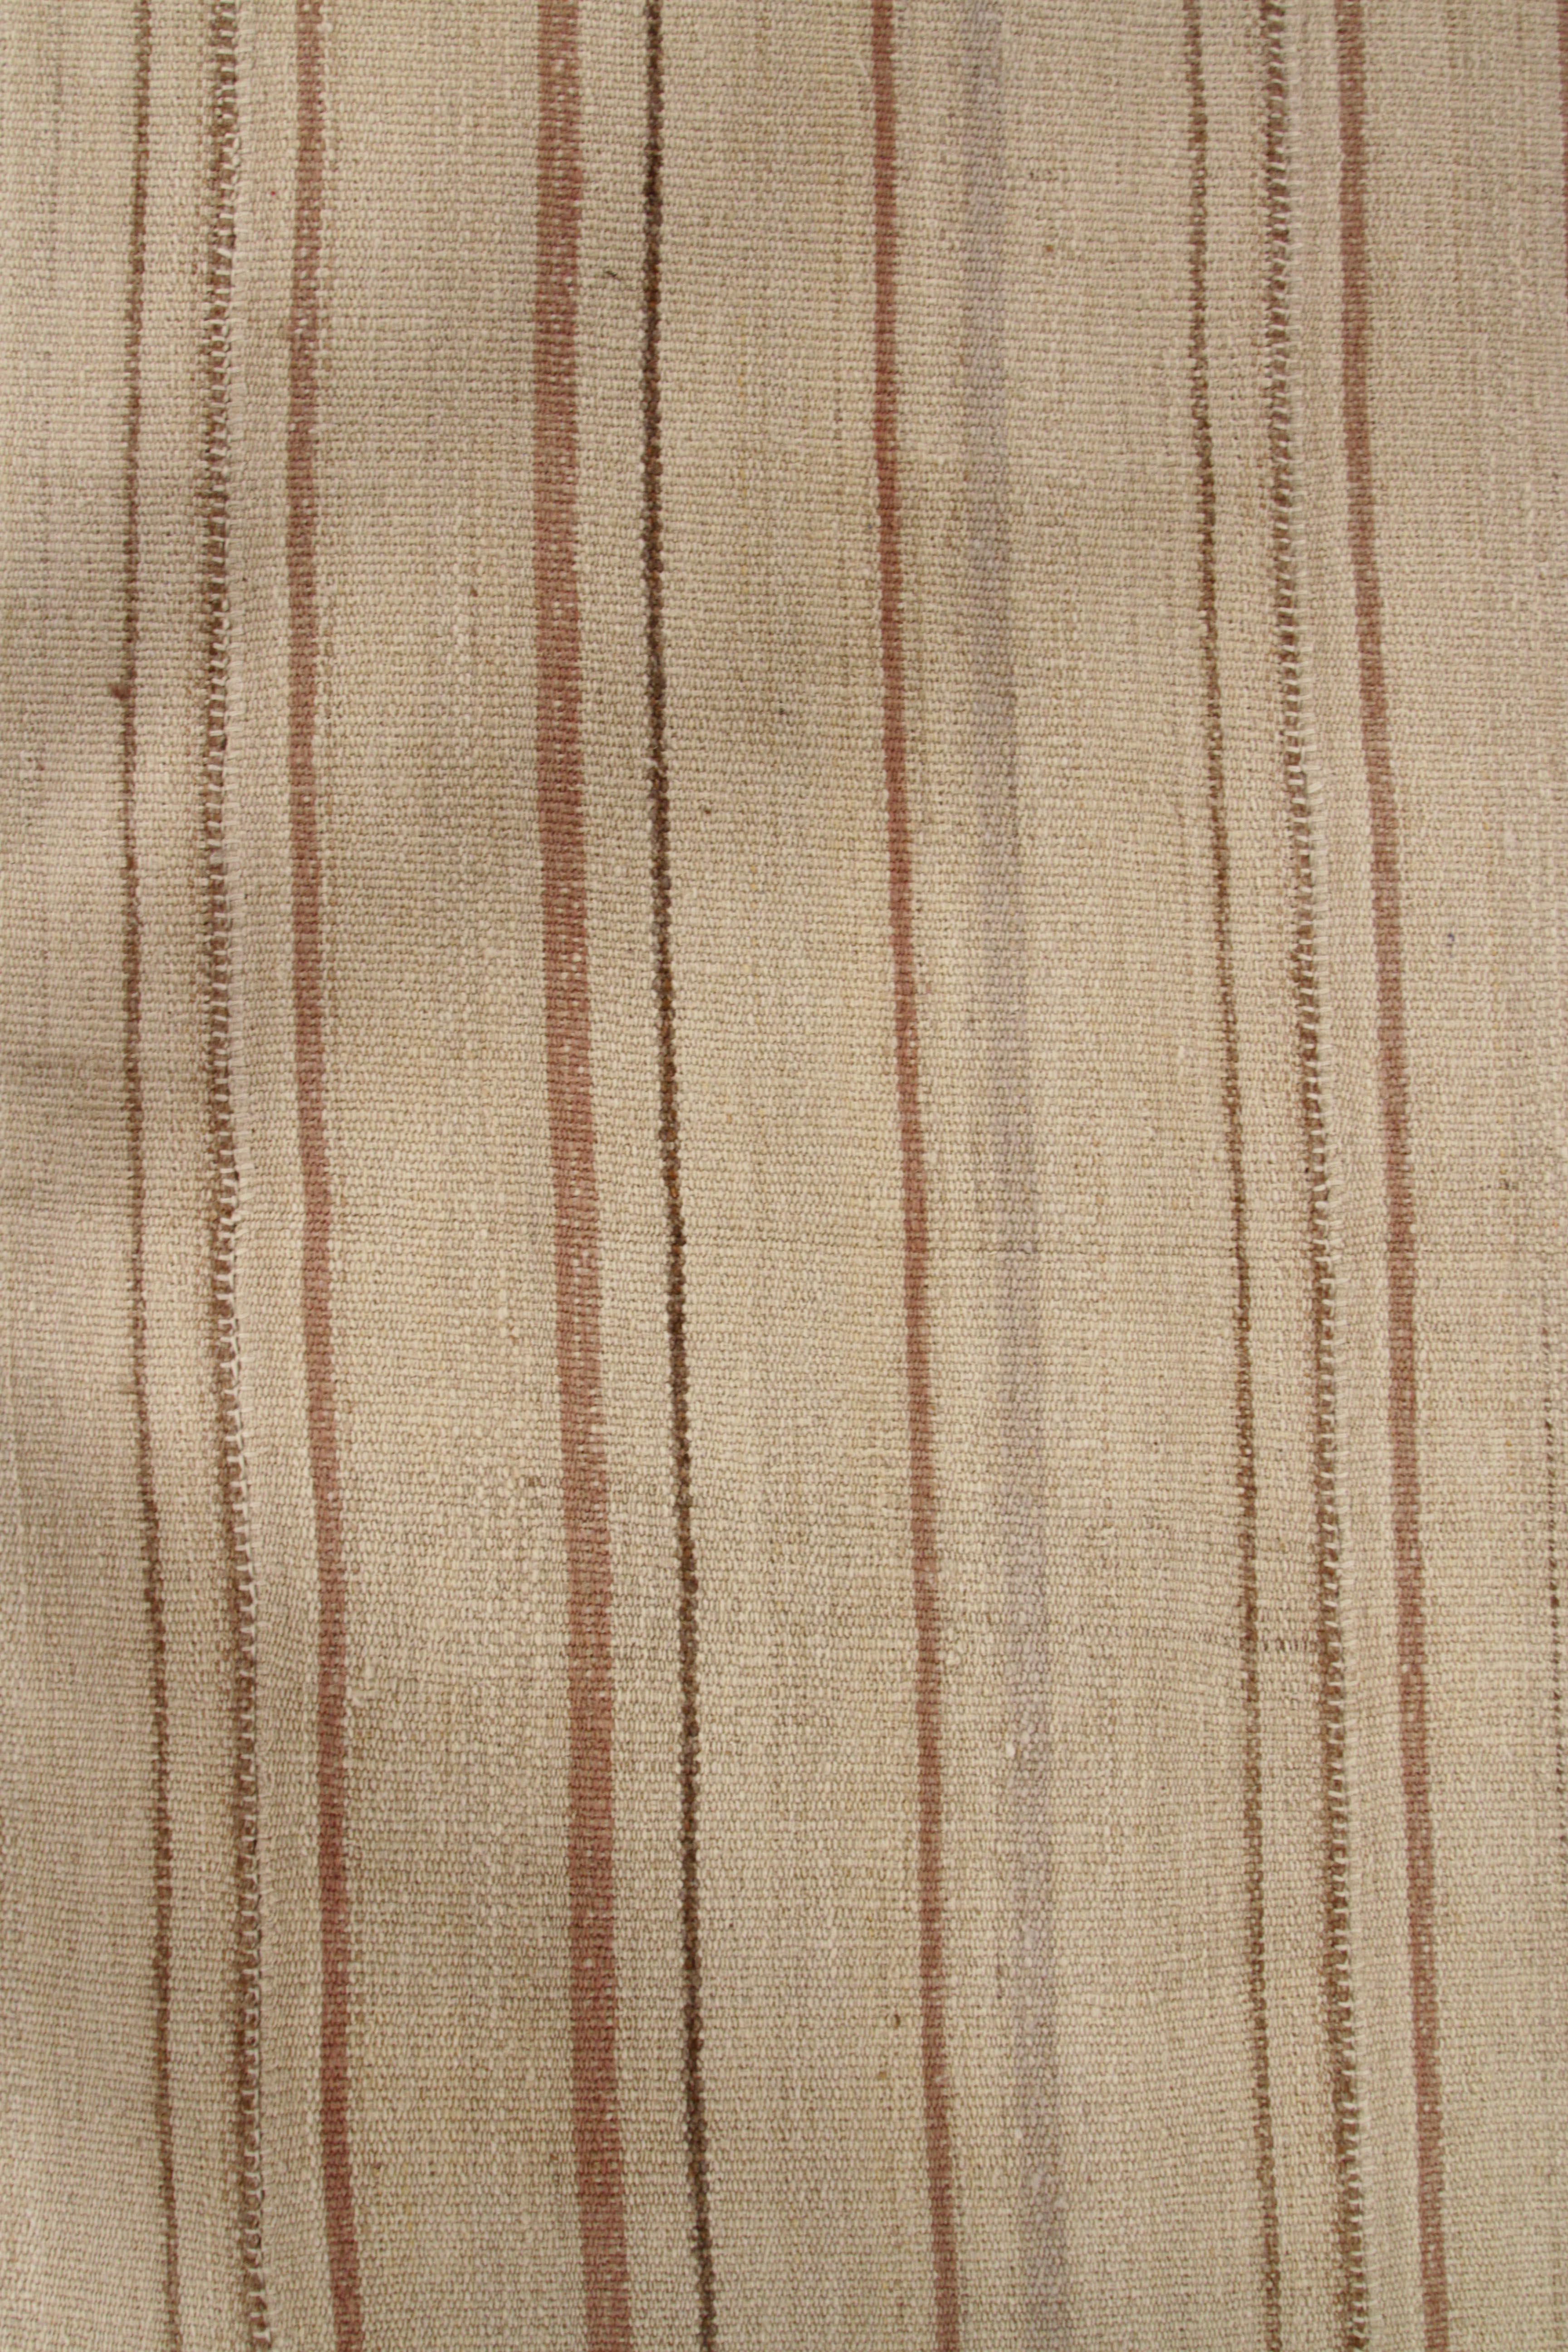 New Persian Kilim Rug in Ivory with Beige and Brown Stripes For Sale 1